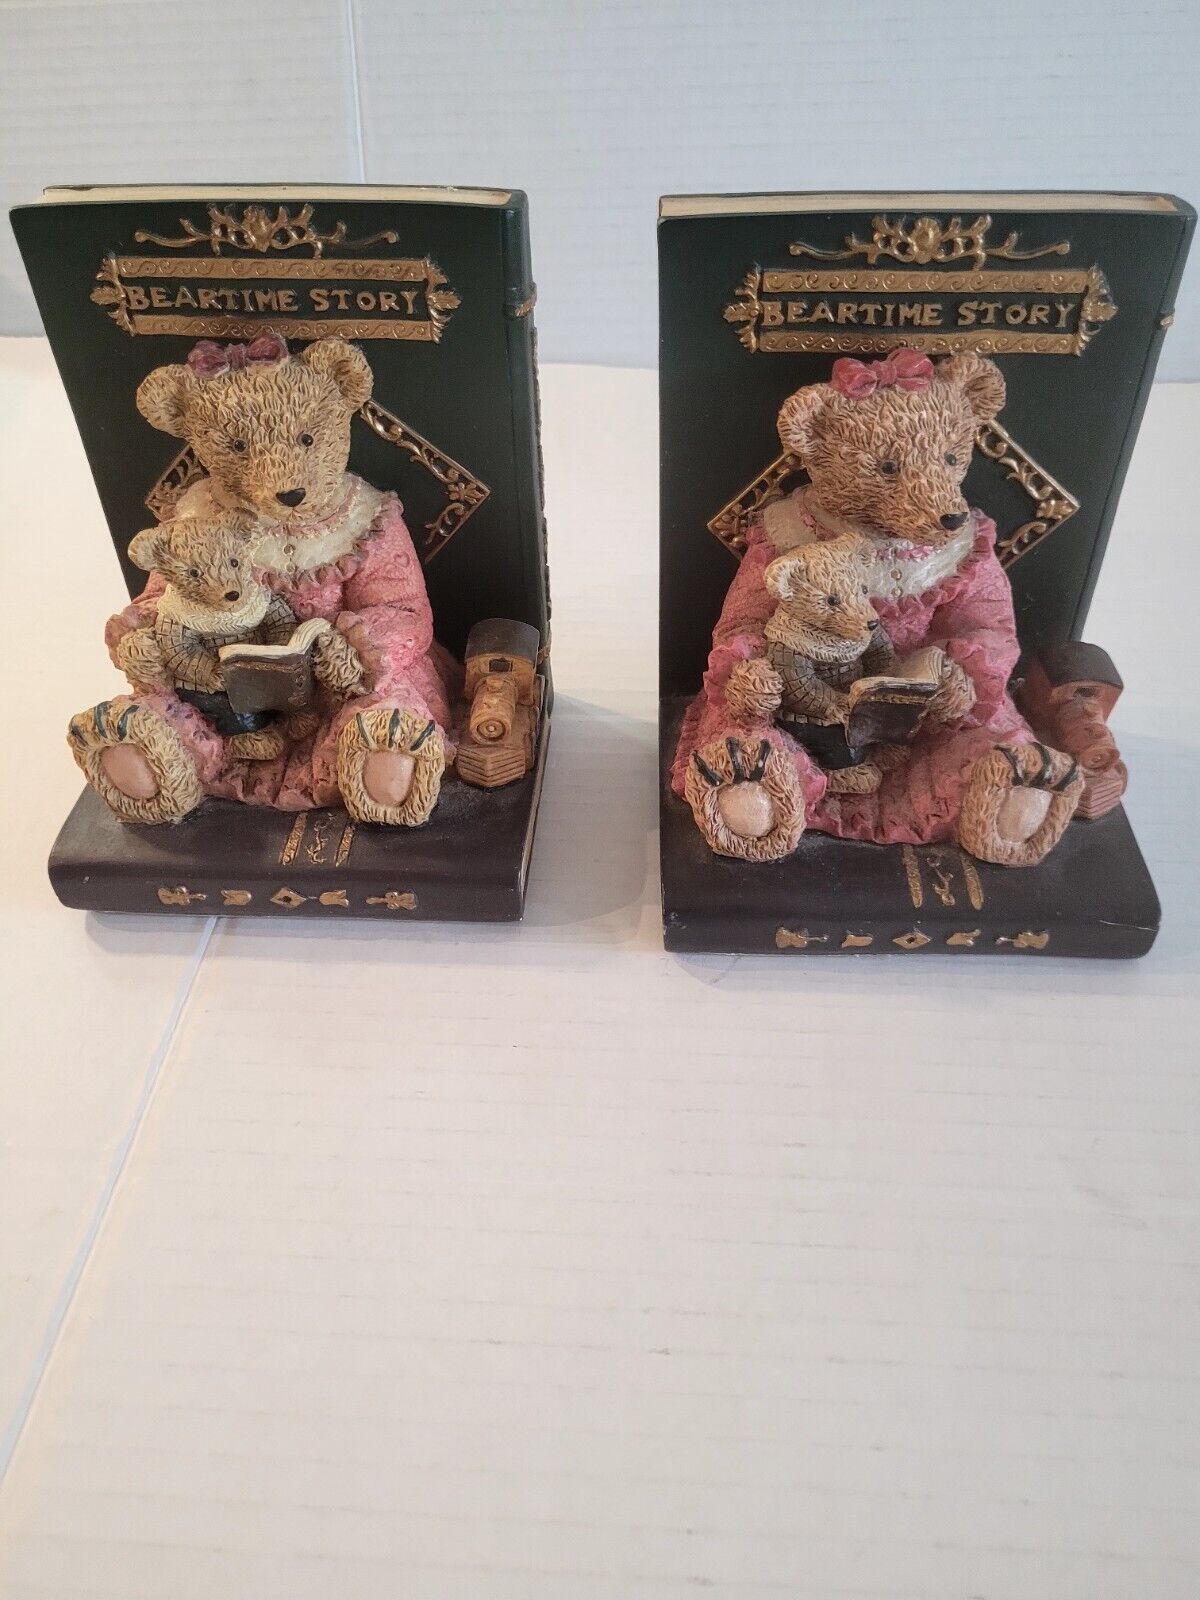 Teddy Bear Beartime Story Set Of Two Decorative Bookends By Arister Gifts